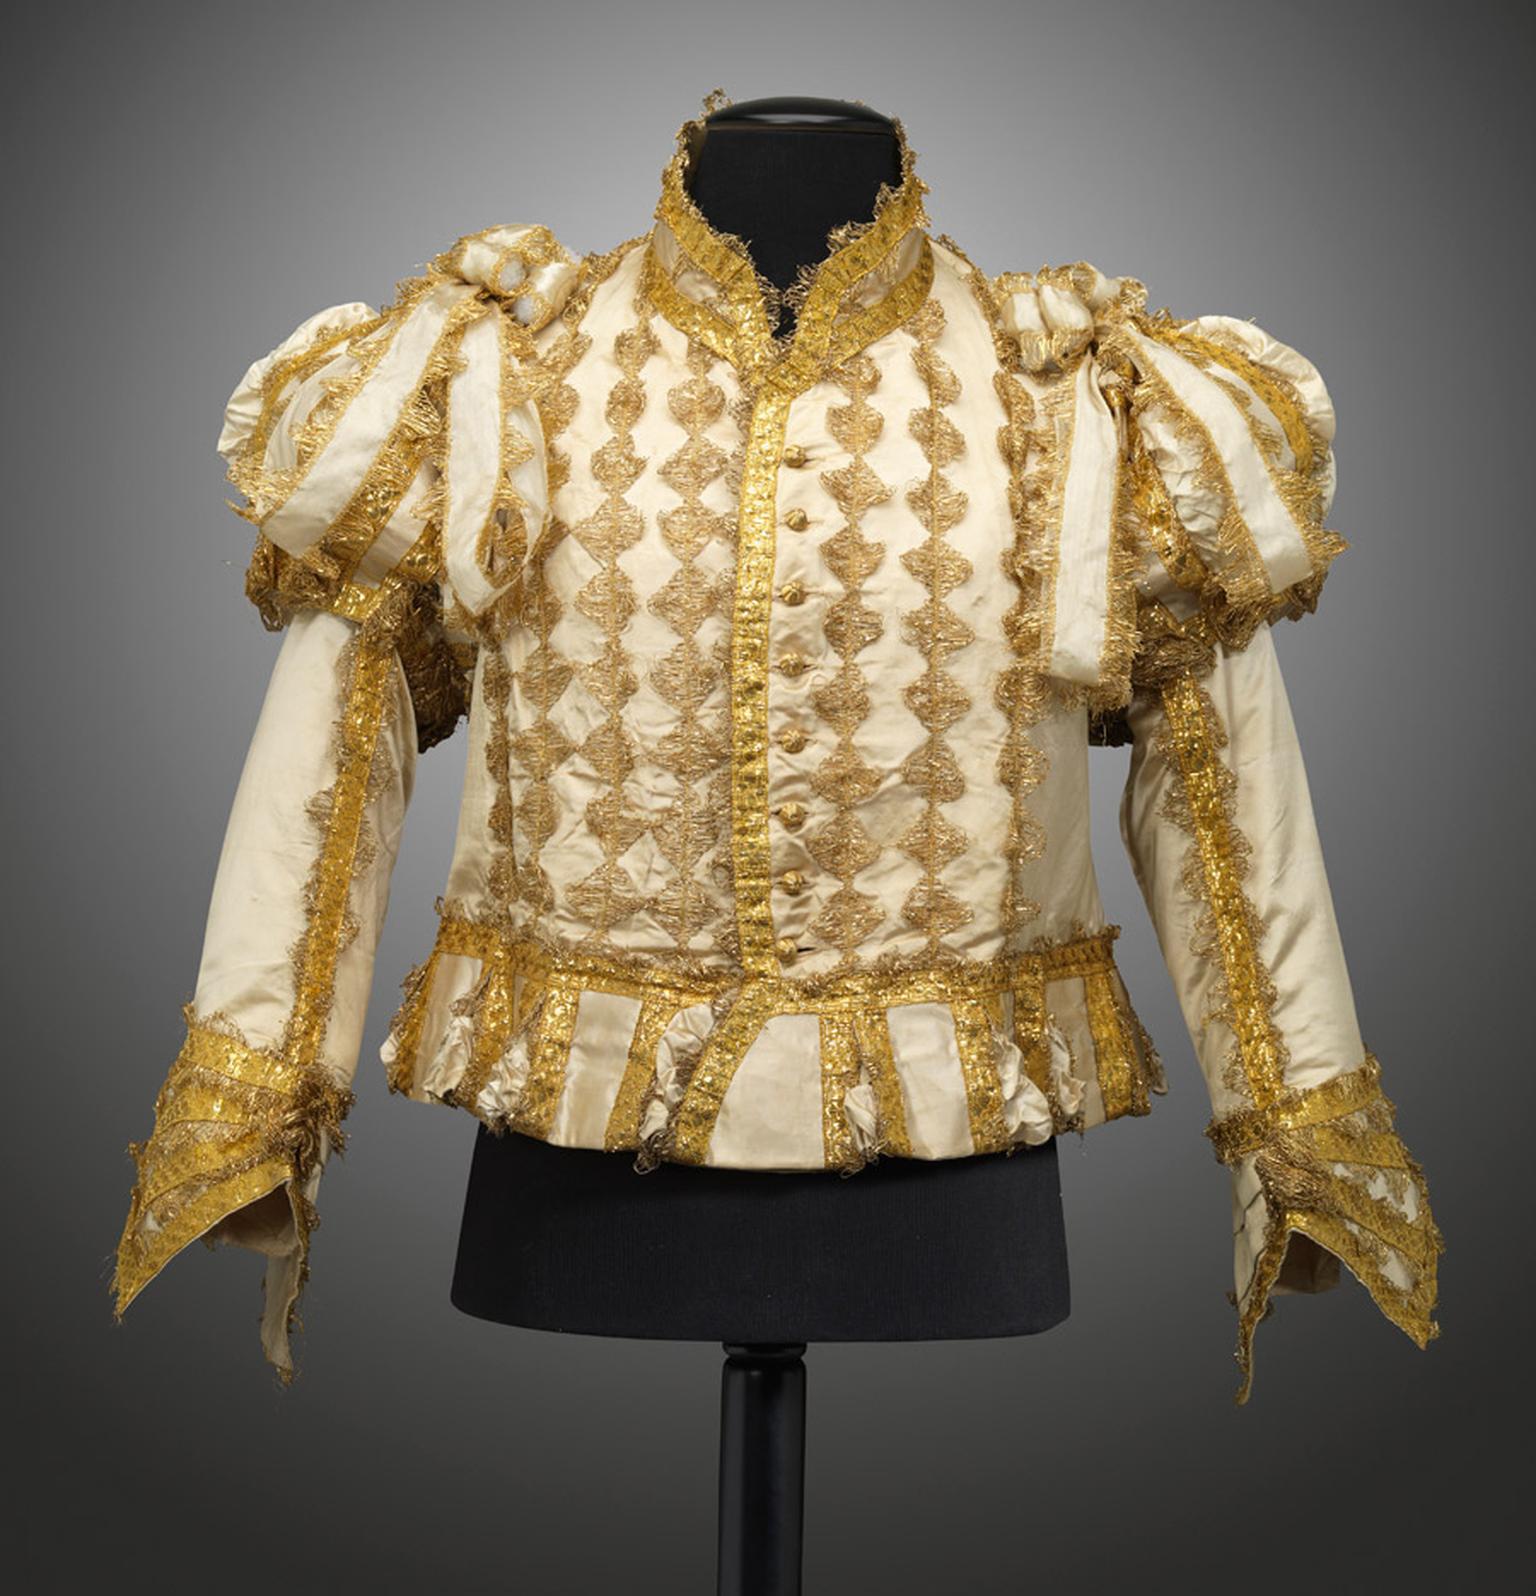 Goldsmiths-Silk-and-gold-jerkin-for-the-coronation-of-George-IV.jpg